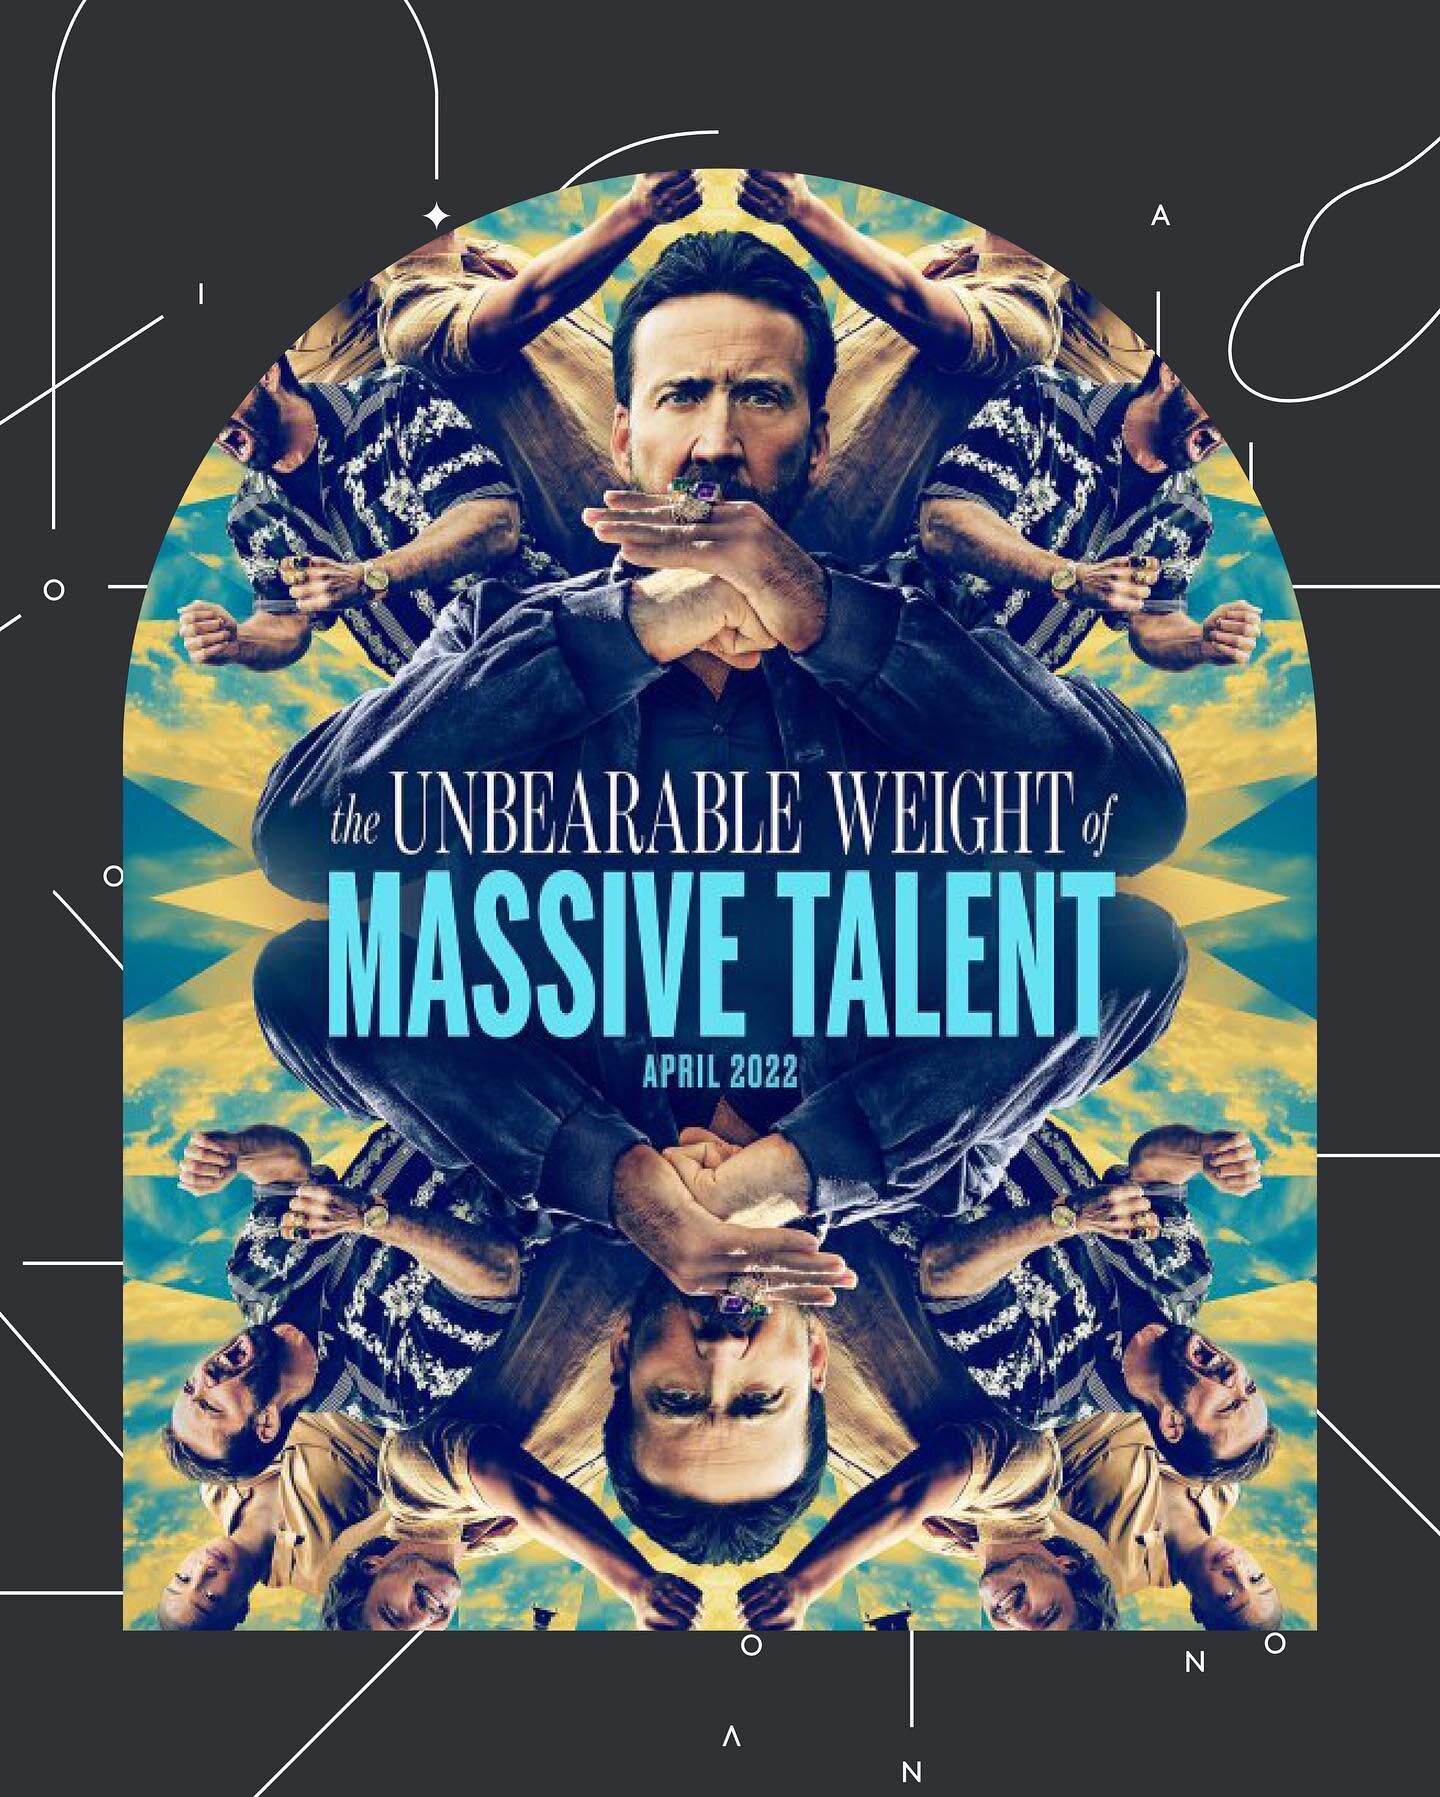 Win MASSIVE this week at Lucky Stike! 🎳
Roll into @luckystrikelive and post a photo of yourself with The Unbearable Weight Of Massive Talent Poster, Lane Screen, or at the Bar TV for a chance to win massive!
Three Grand Prize Winners will get a Bowl